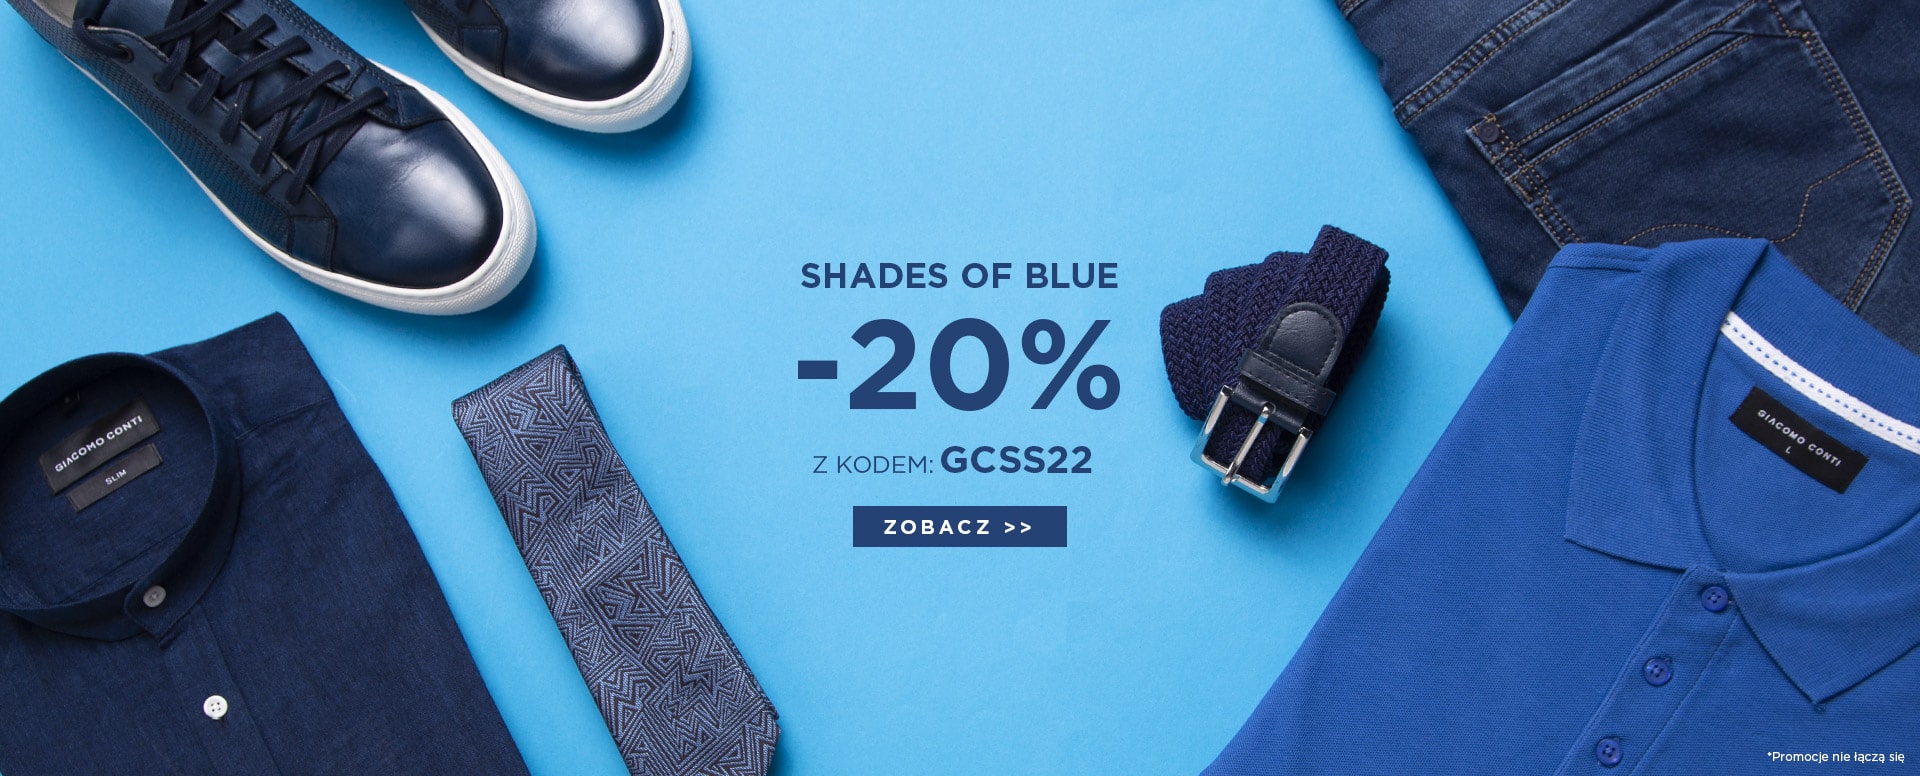 Shades of blue -20%